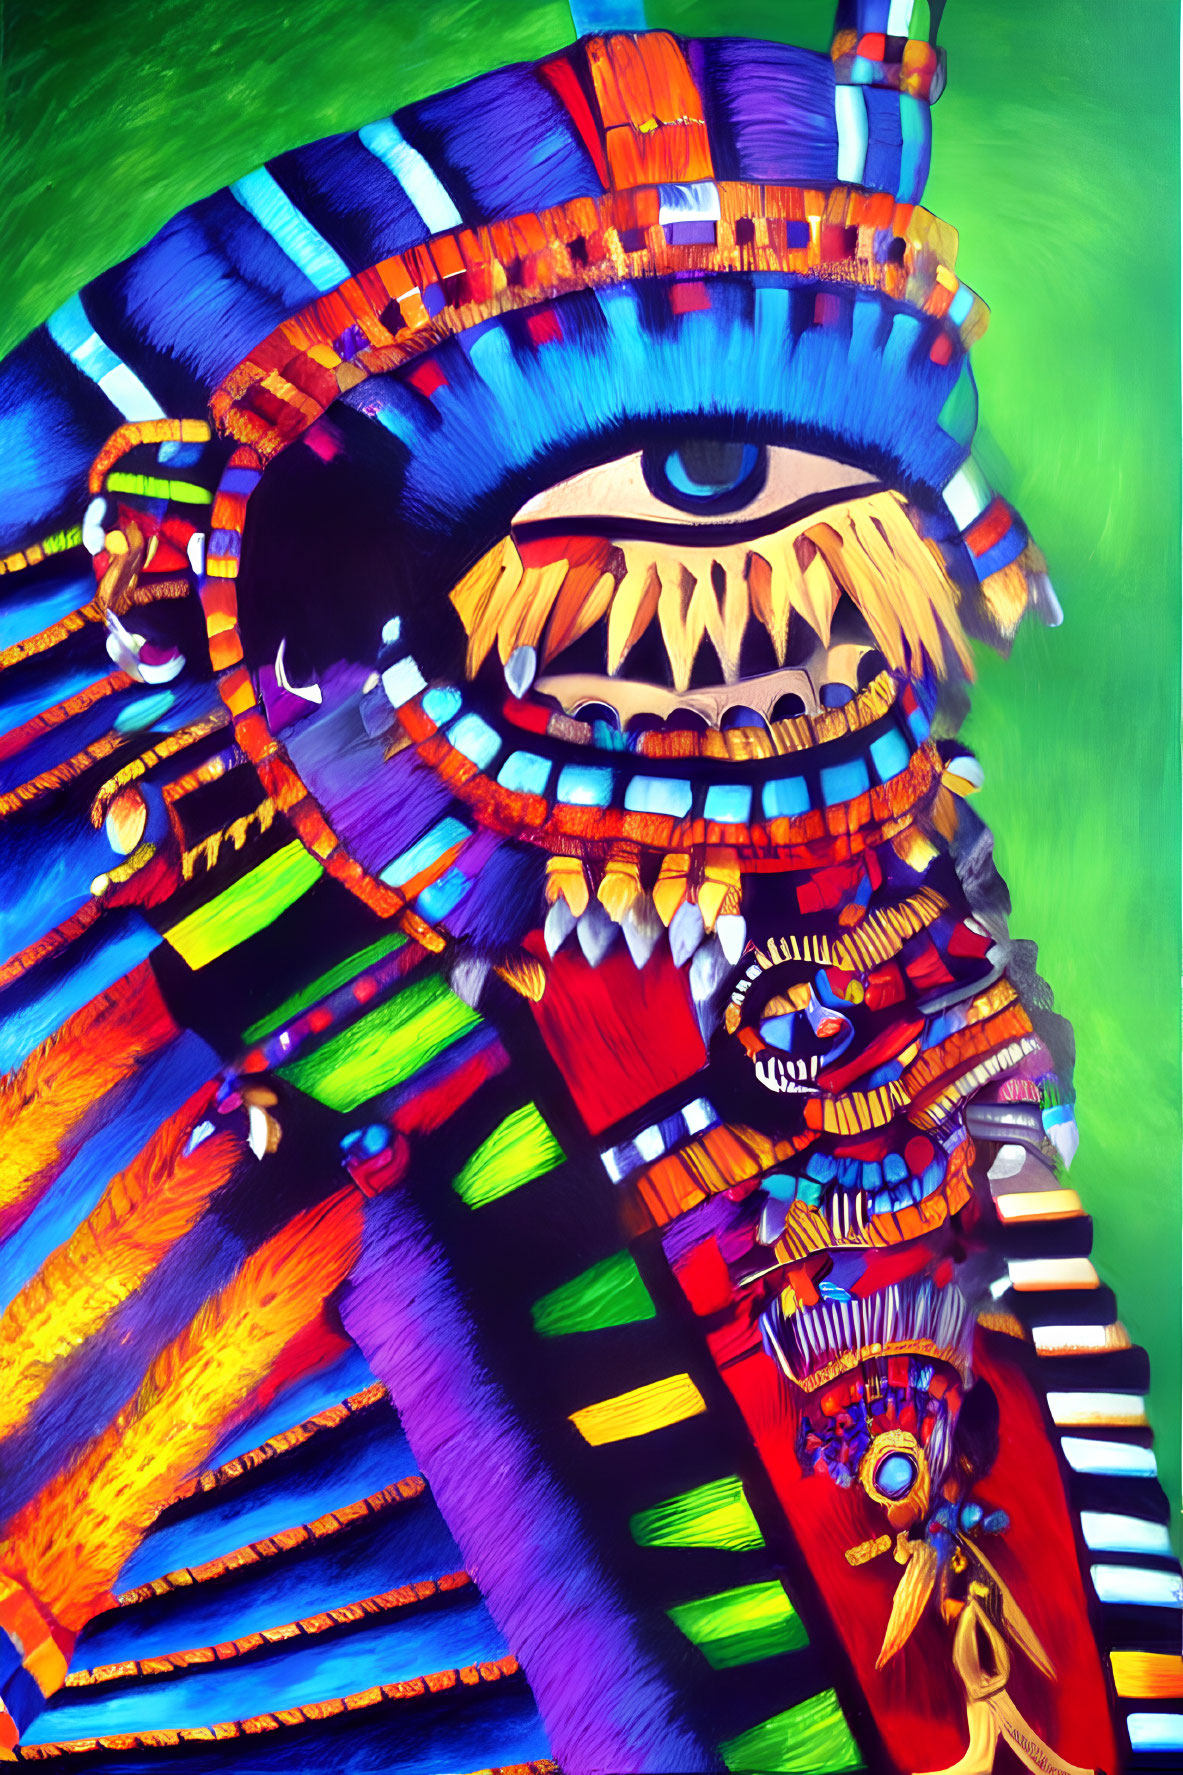 Colorful Abstract Humanoid Figure with Prominent Eye in Blue, Red, and Green